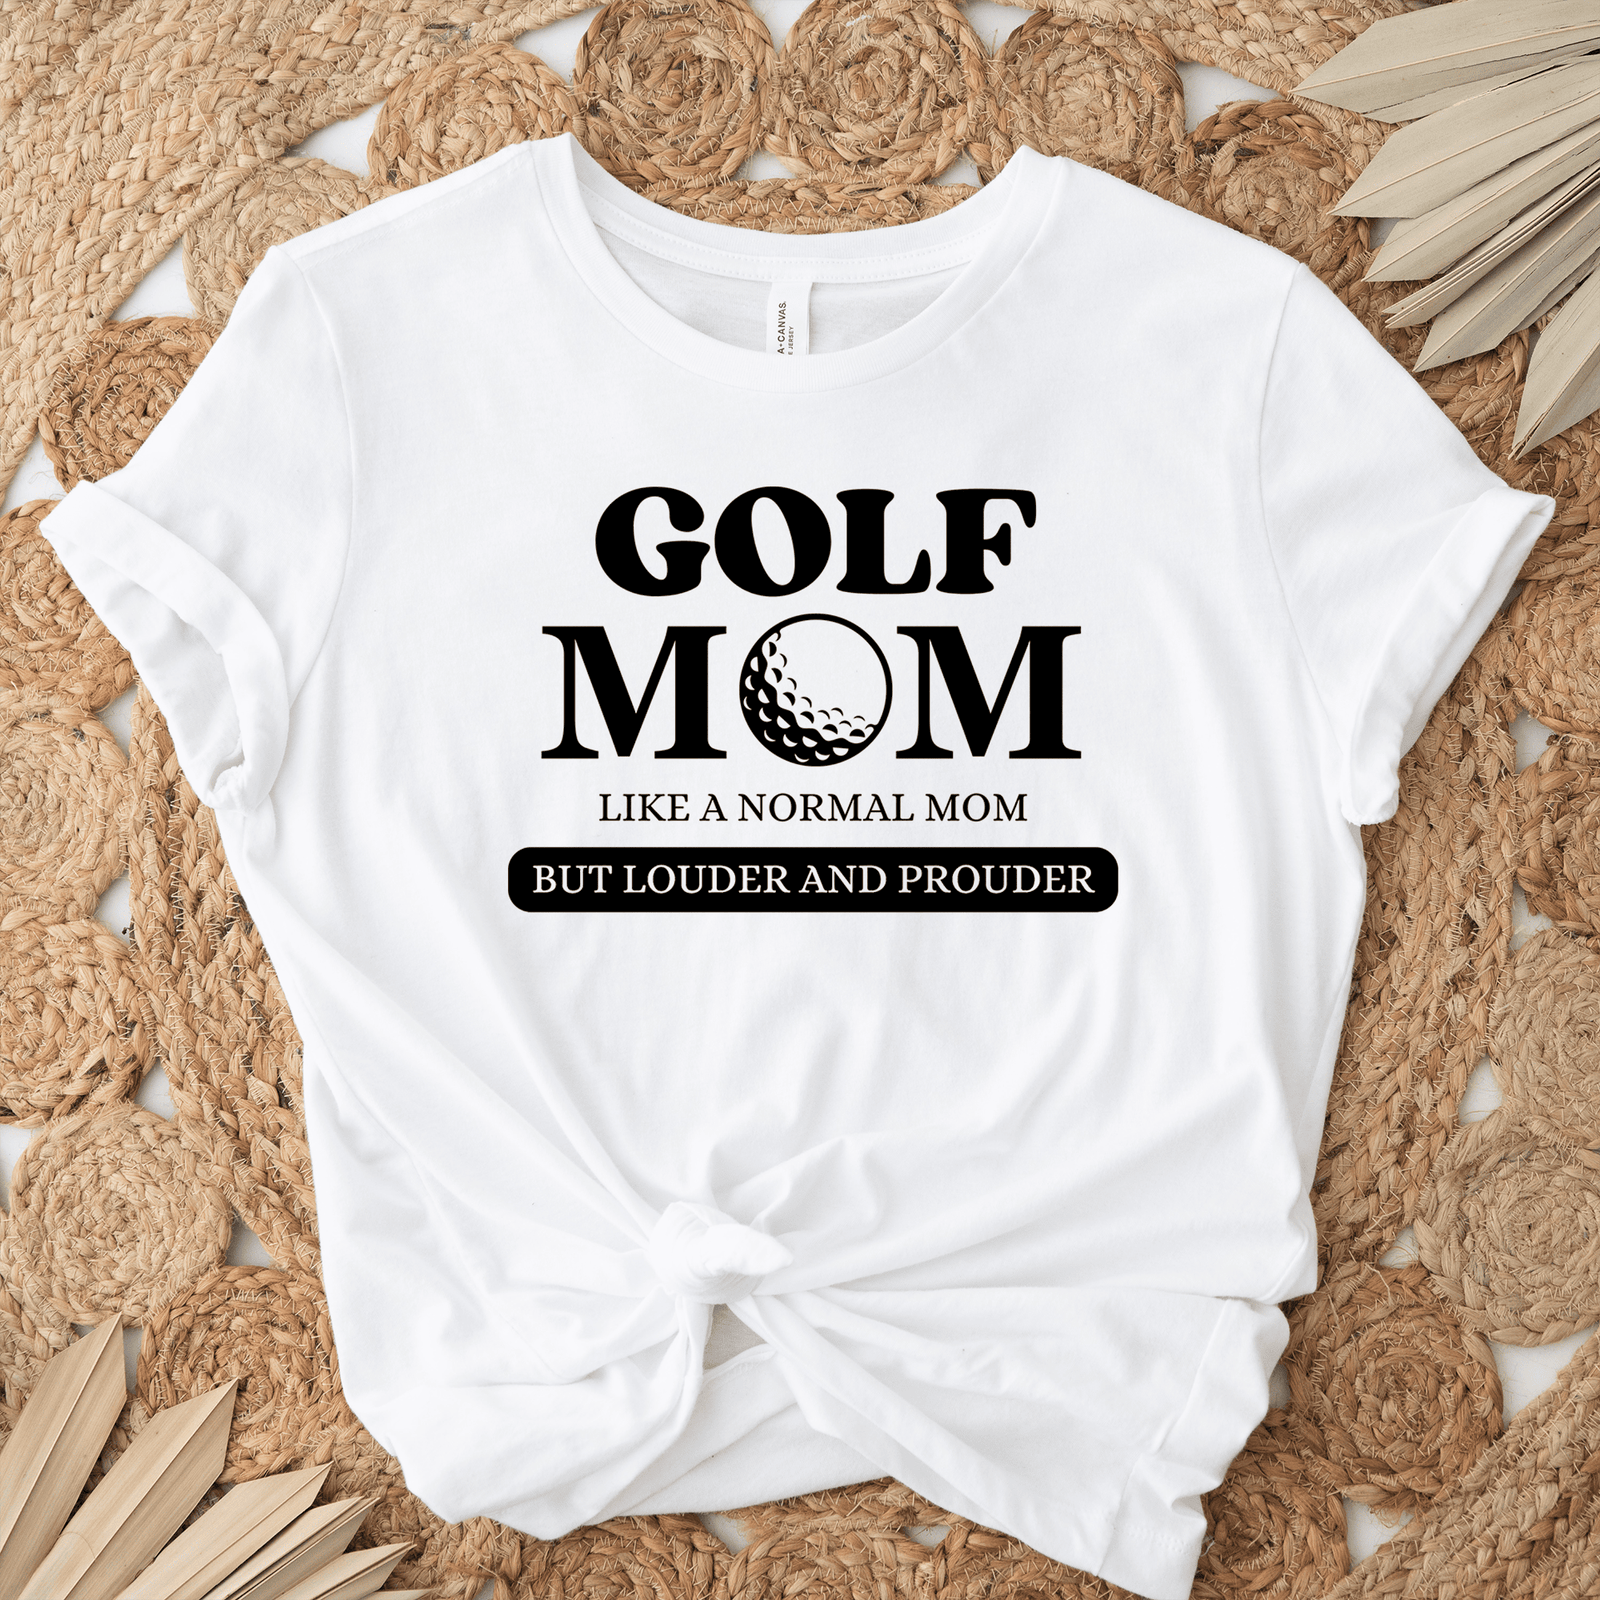 Womens White T Shirt with Golf-Moms-Are-Loud-And-Proud design